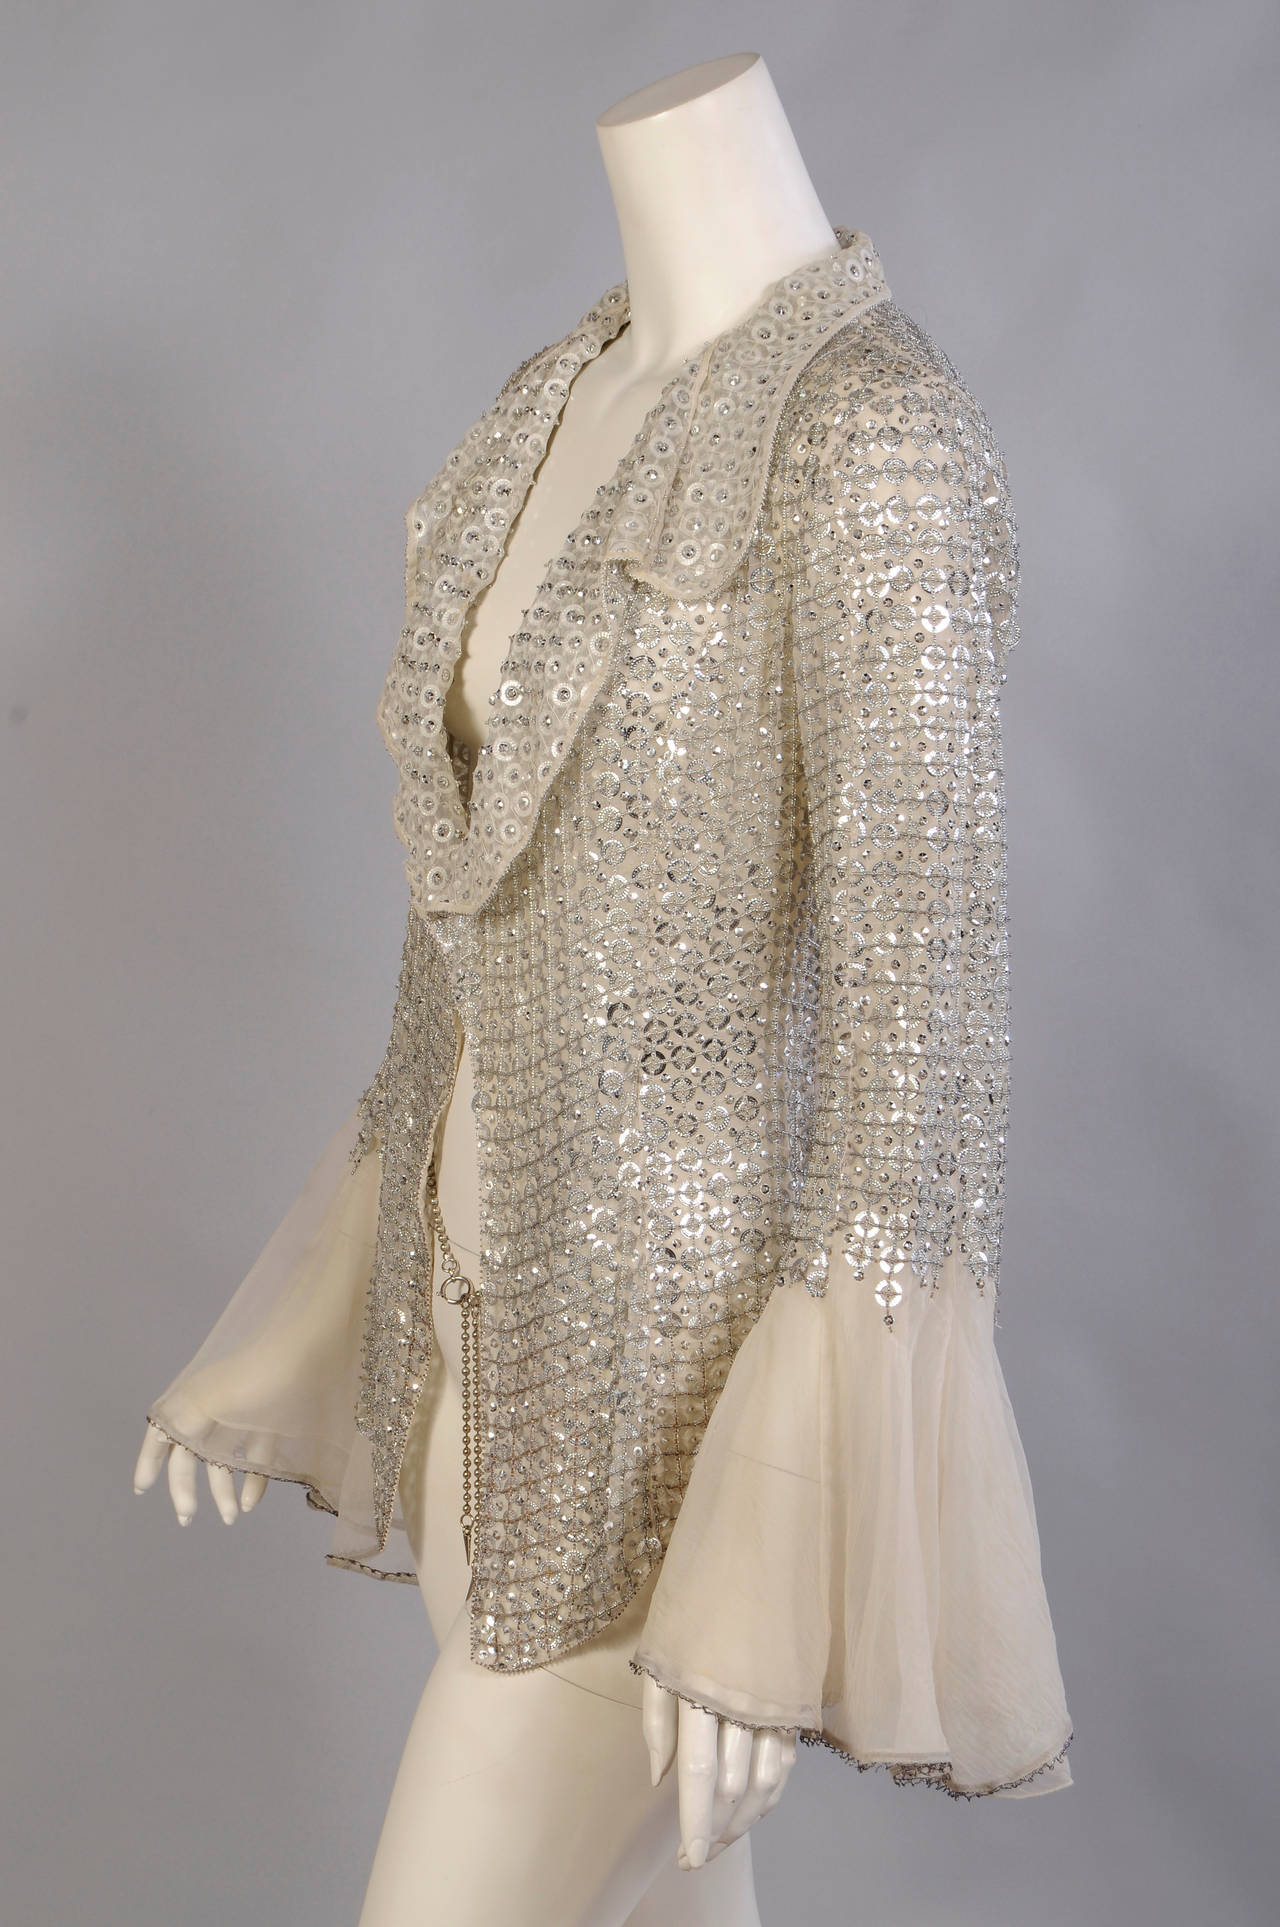 This silk organza jacket is lavishly beaded with silver sequin rings, small silver sequins and caviar beads. A delicate lattice of silver beadwork overlays the beaded design. The wrong side of the collar, lapels and front facings are also beaded